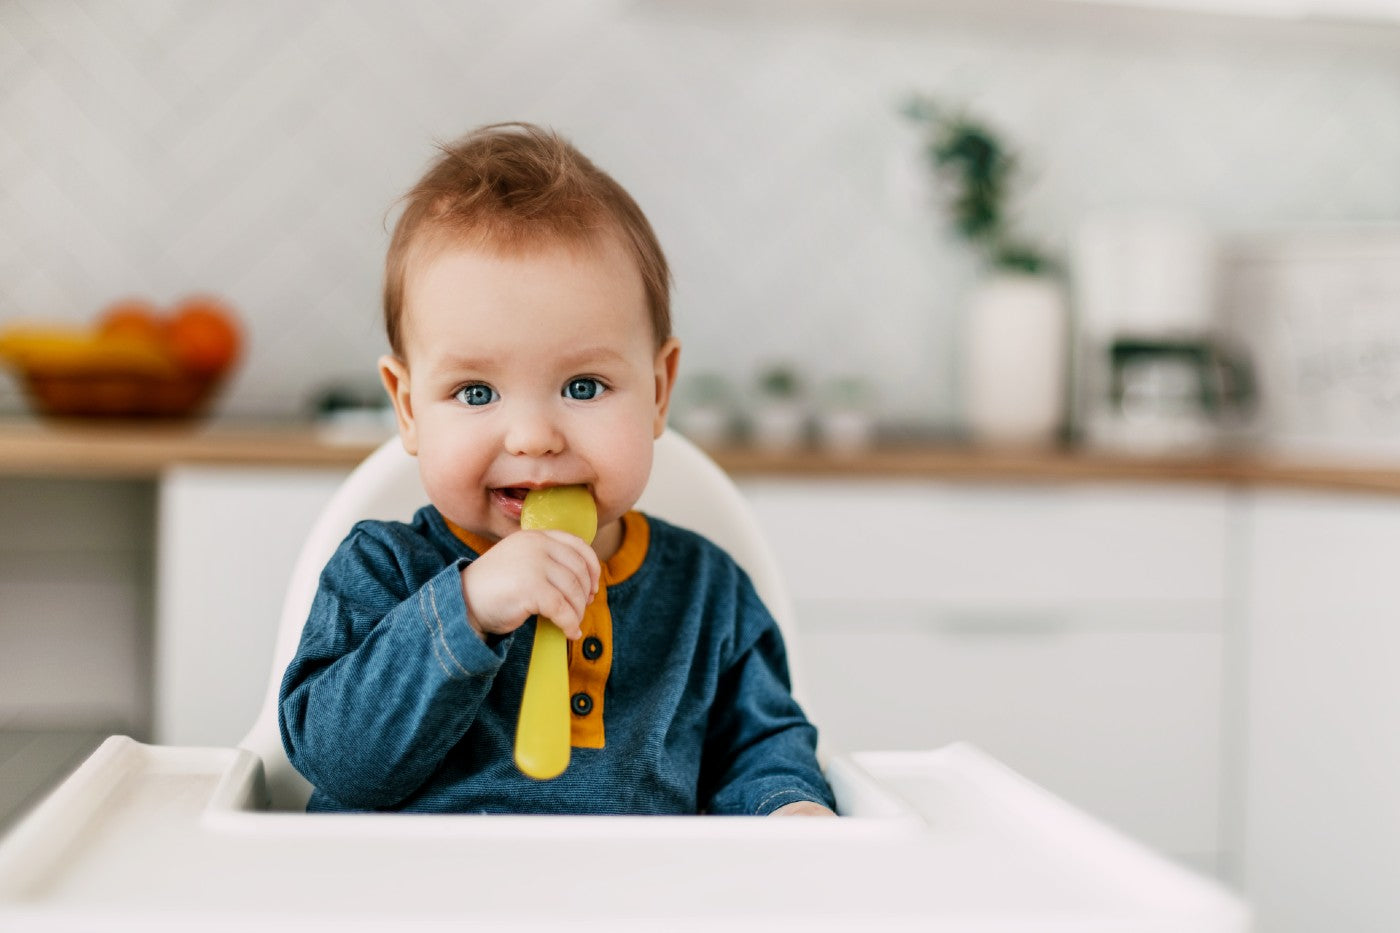 Hands vs Spoons: When to Introduce a Spoon During Baby-Led Weaning